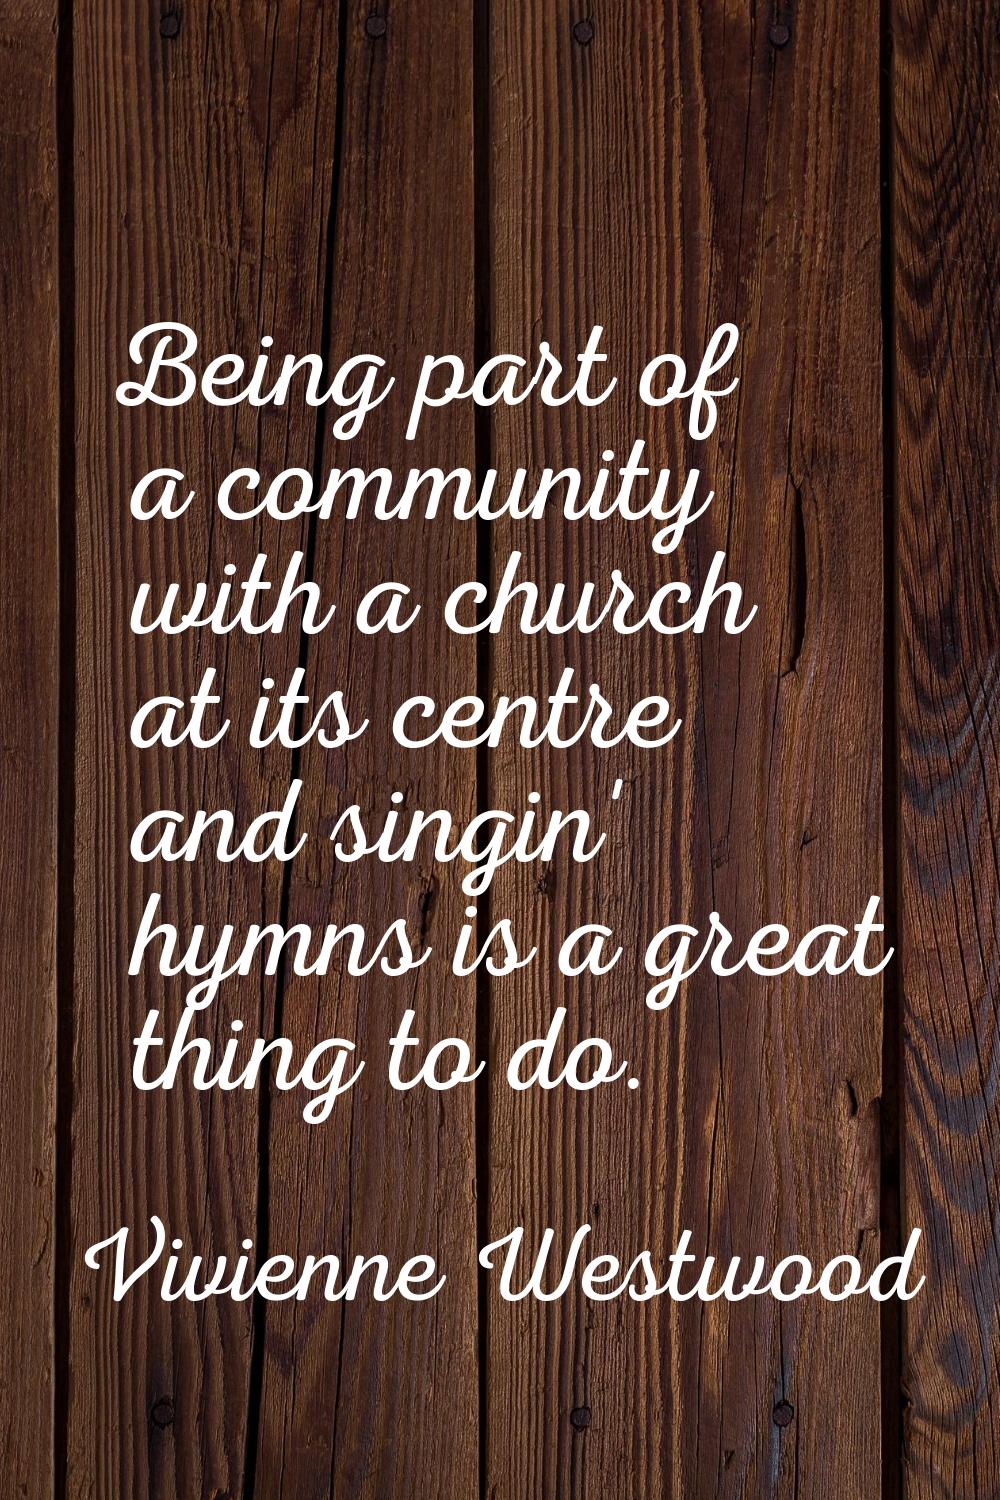 Being part of a community with a church at its centre and singin' hymns is a great thing to do.